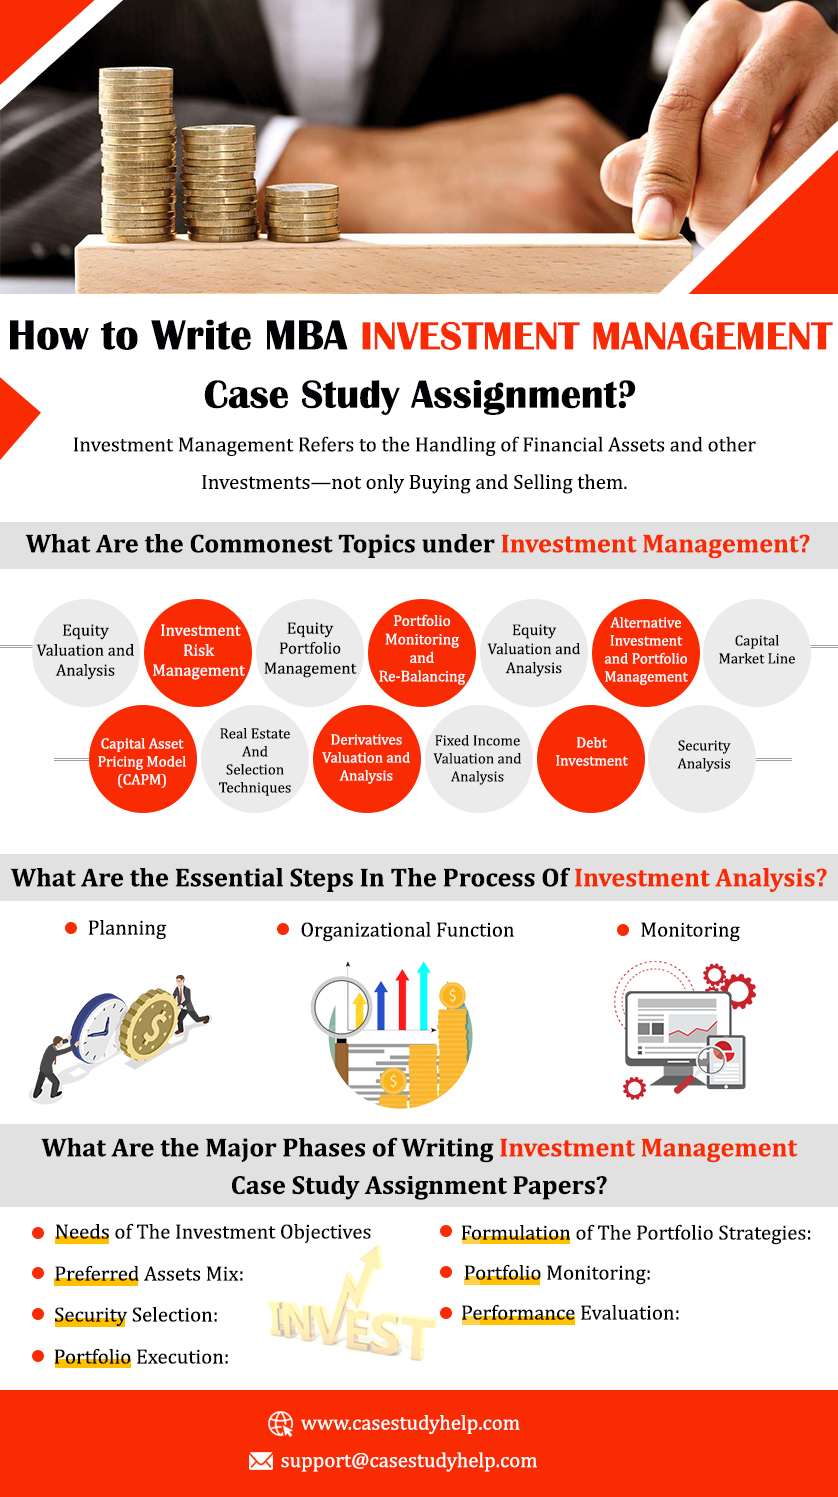 How to Write MBA Investment Management Case Study Assignment?